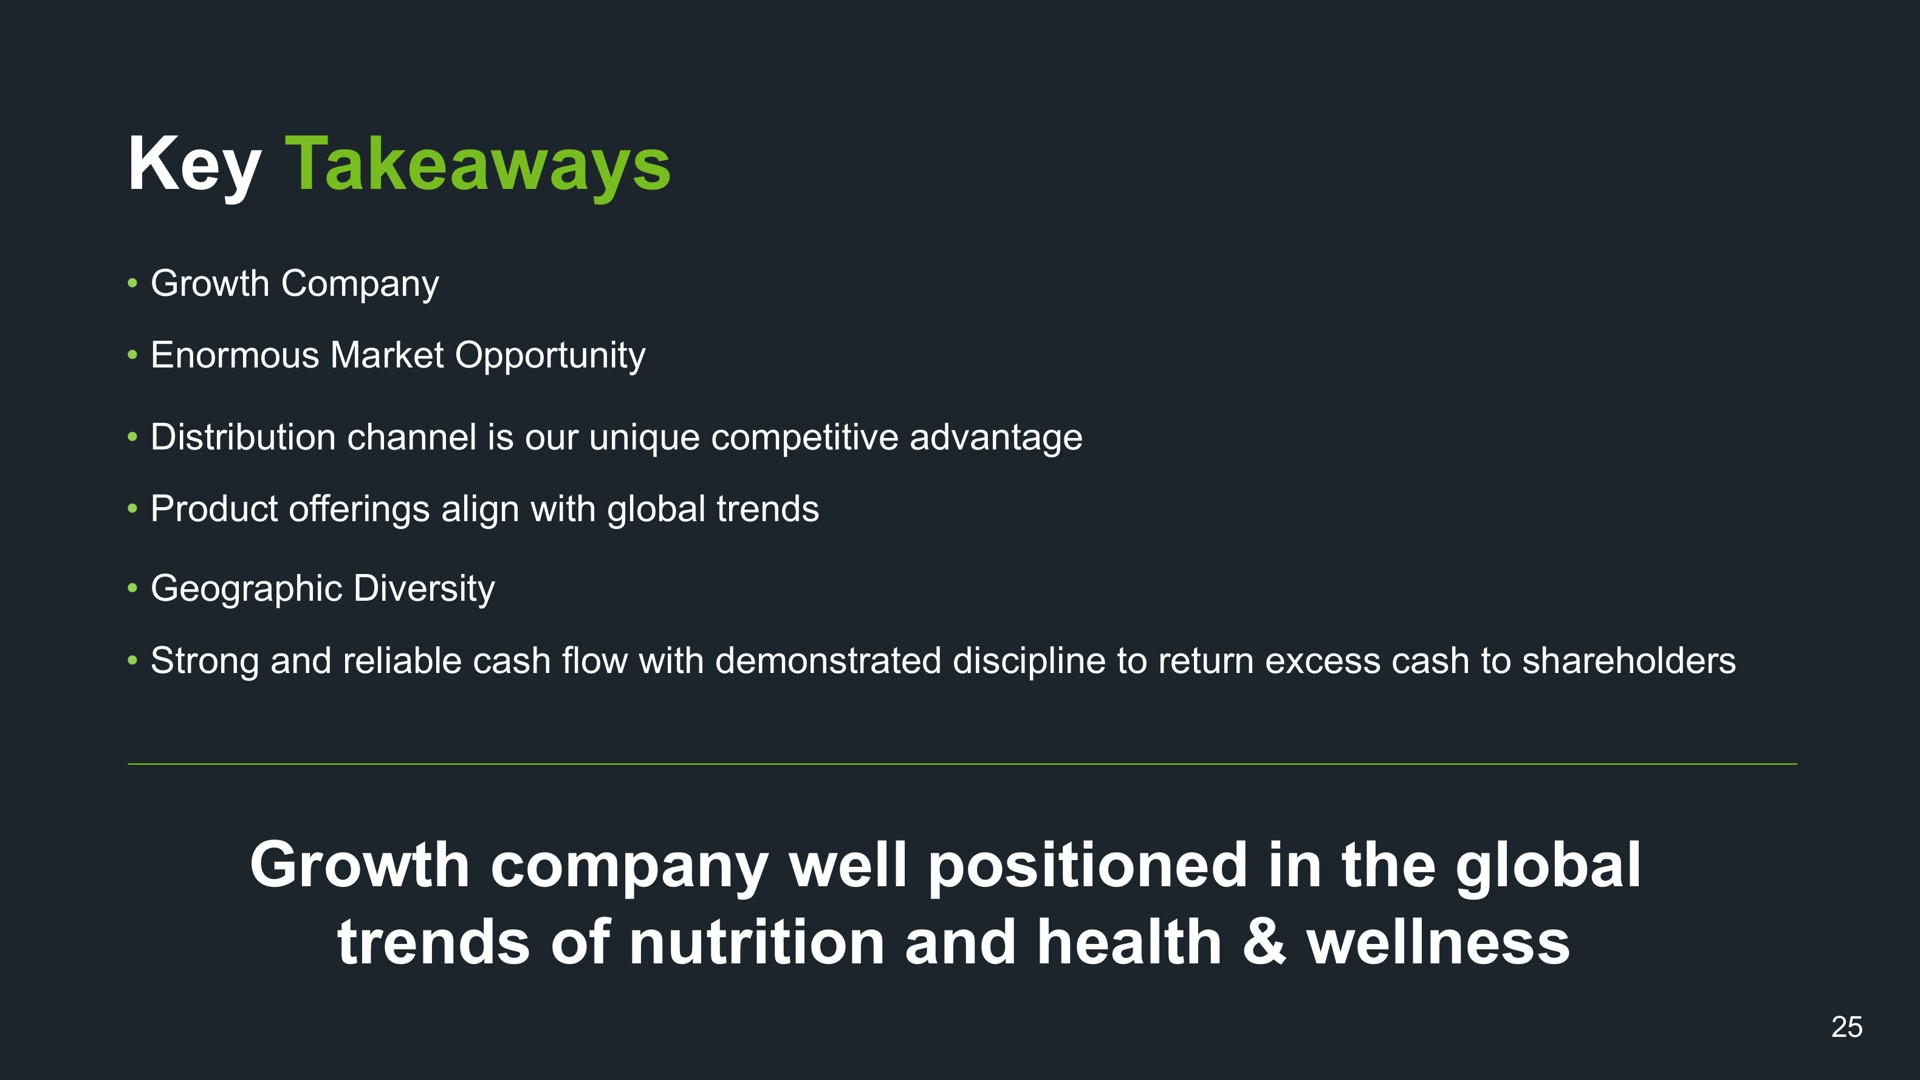 a a key growth company well positioned in the global trends of nutrition and health wellness | Herbalife